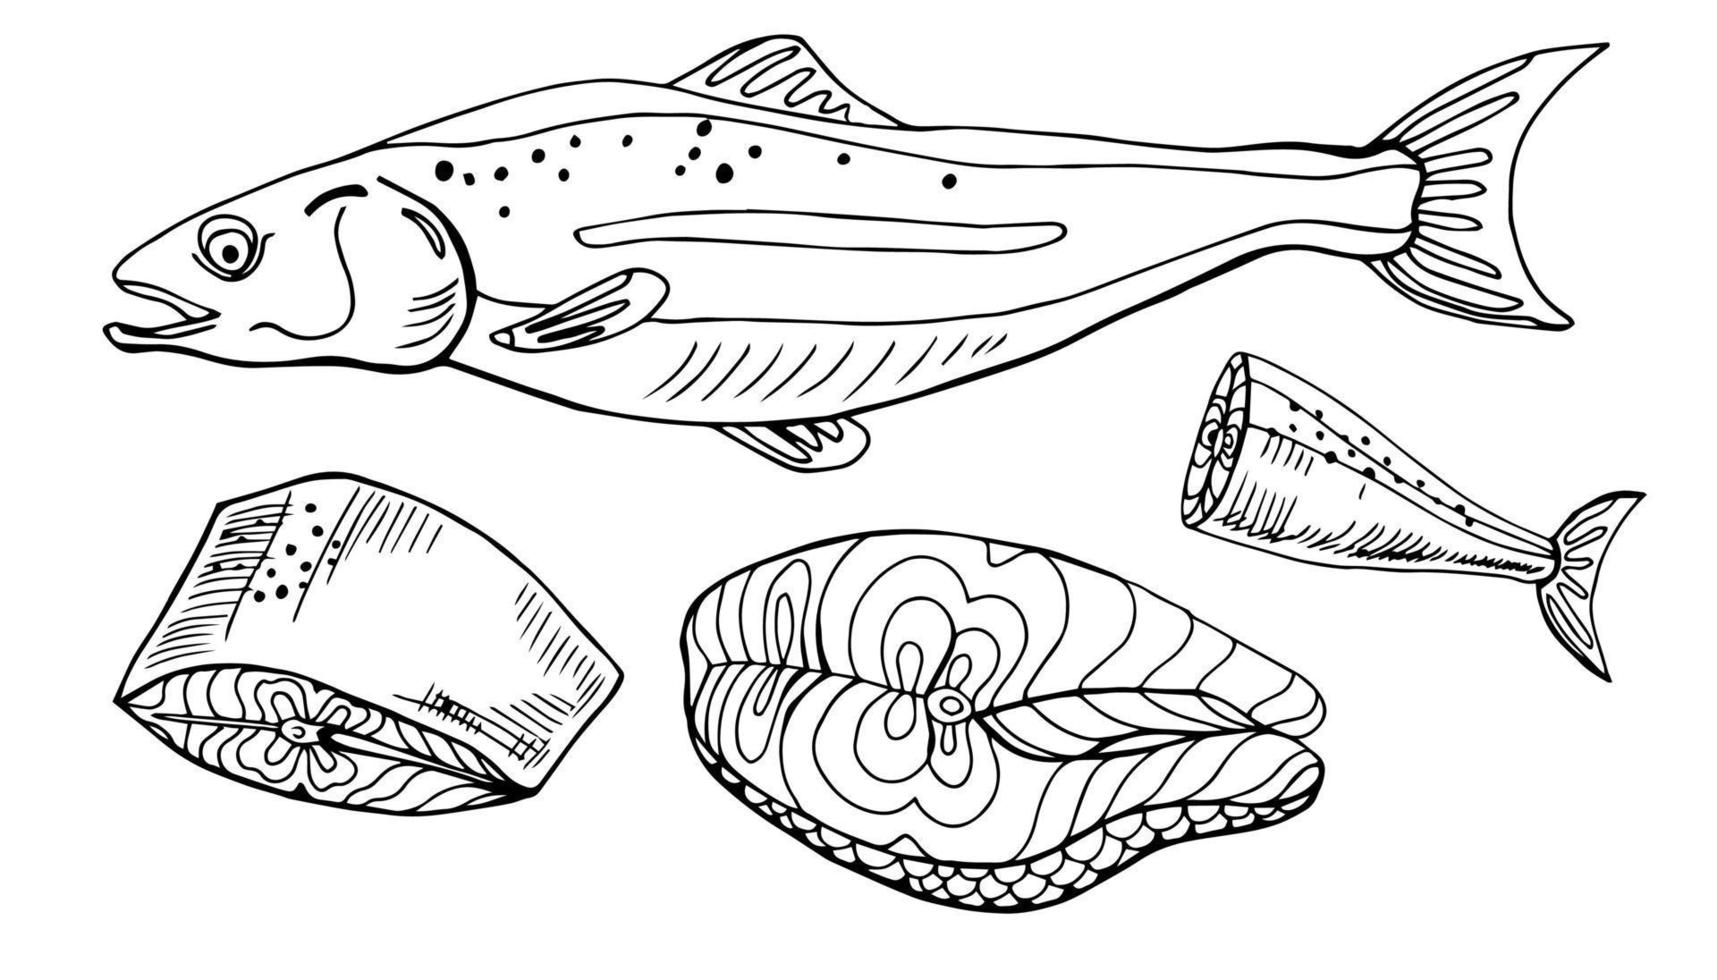 Salmon whole red fish, caviar, raw steaks and fillet realistic isolated outline vector illustration. Drawn monochrome seafood meal.